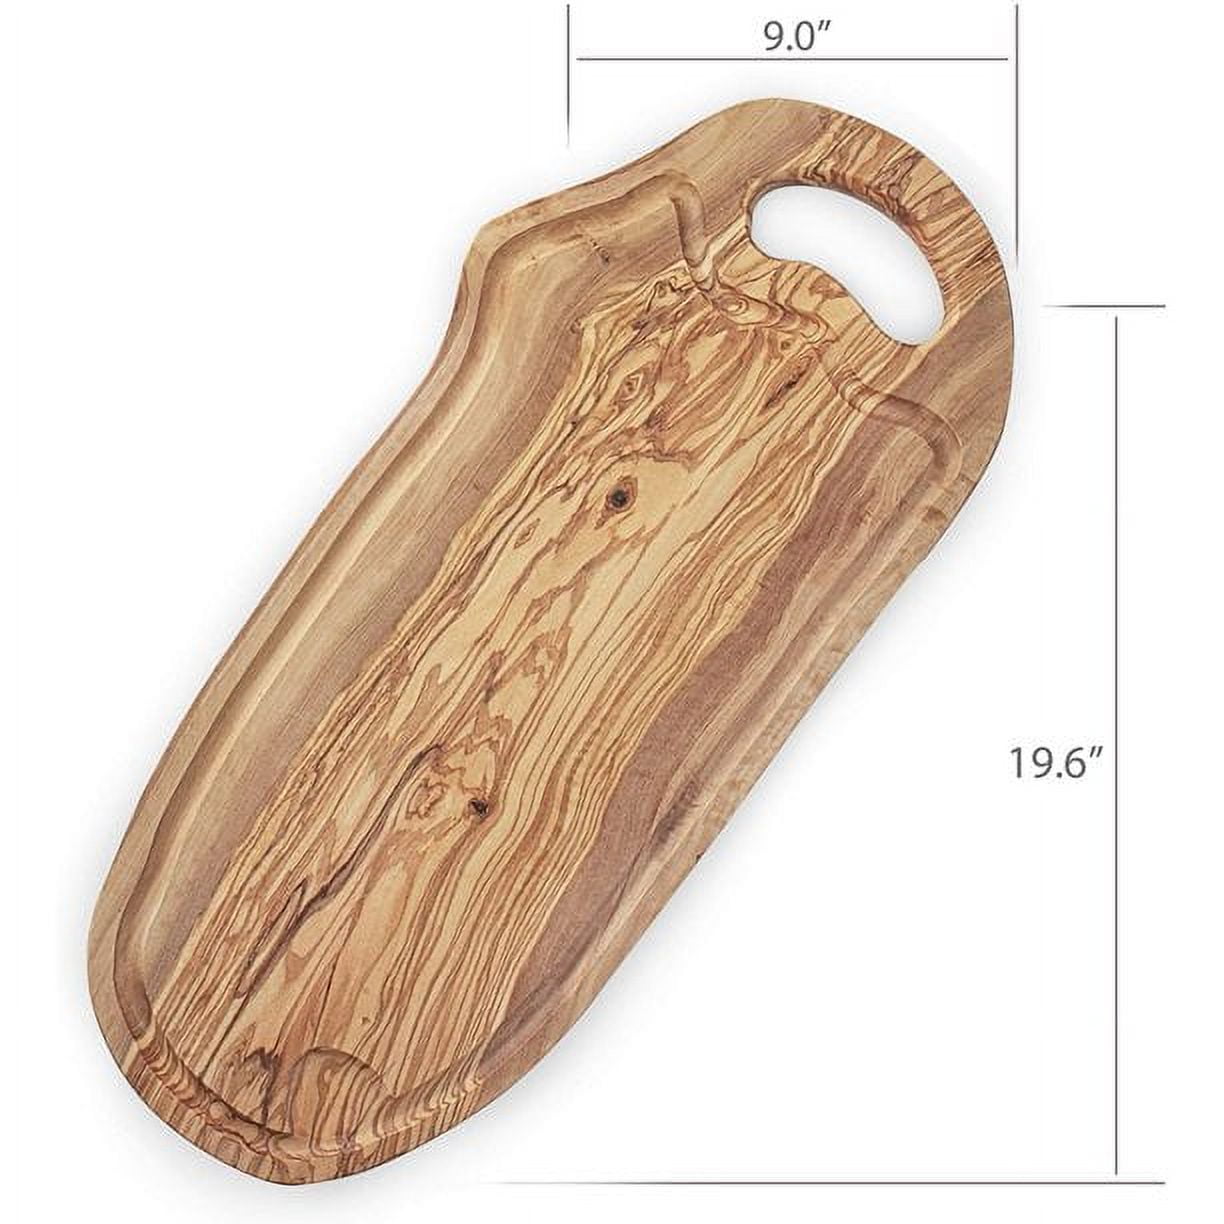 Mini Wood Serving Board - Eat Well - Miller St. Boutique